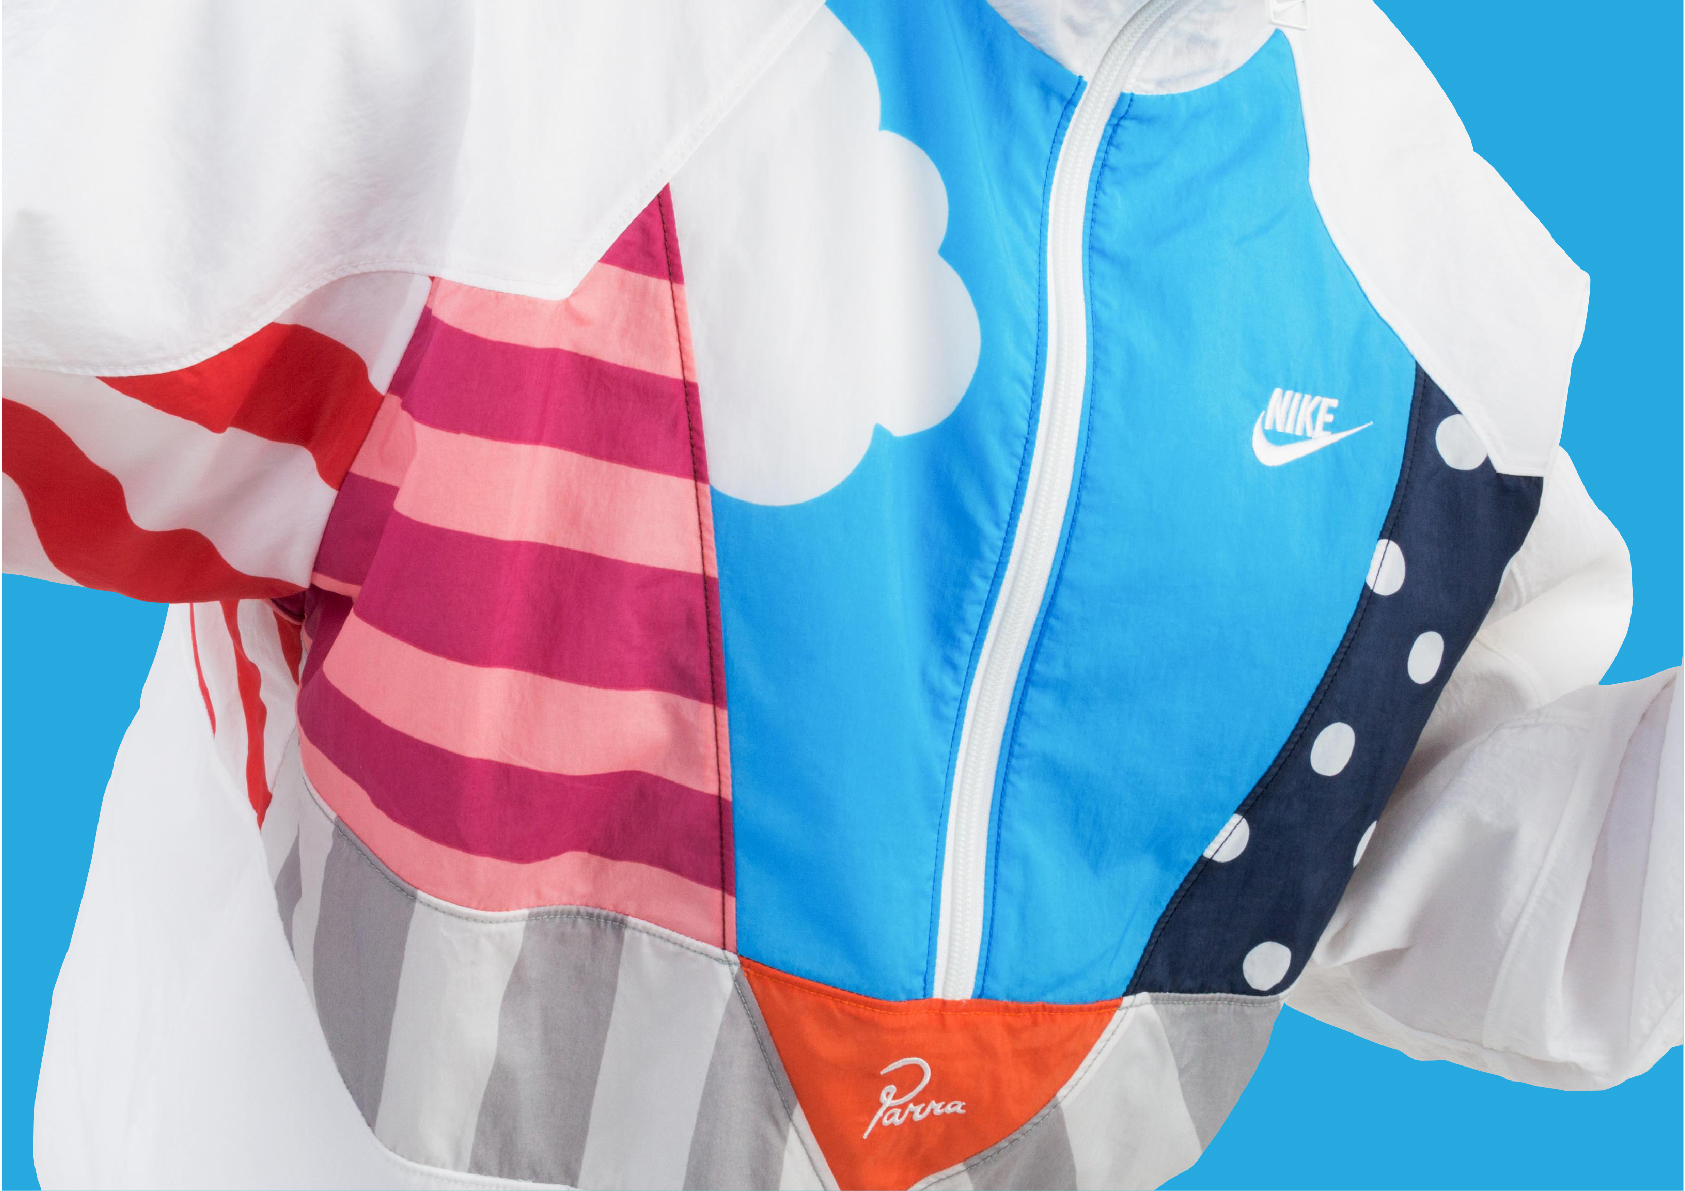 The Nike x Parra line will feature 3 sneakers and 1 jacket. | WAVE®